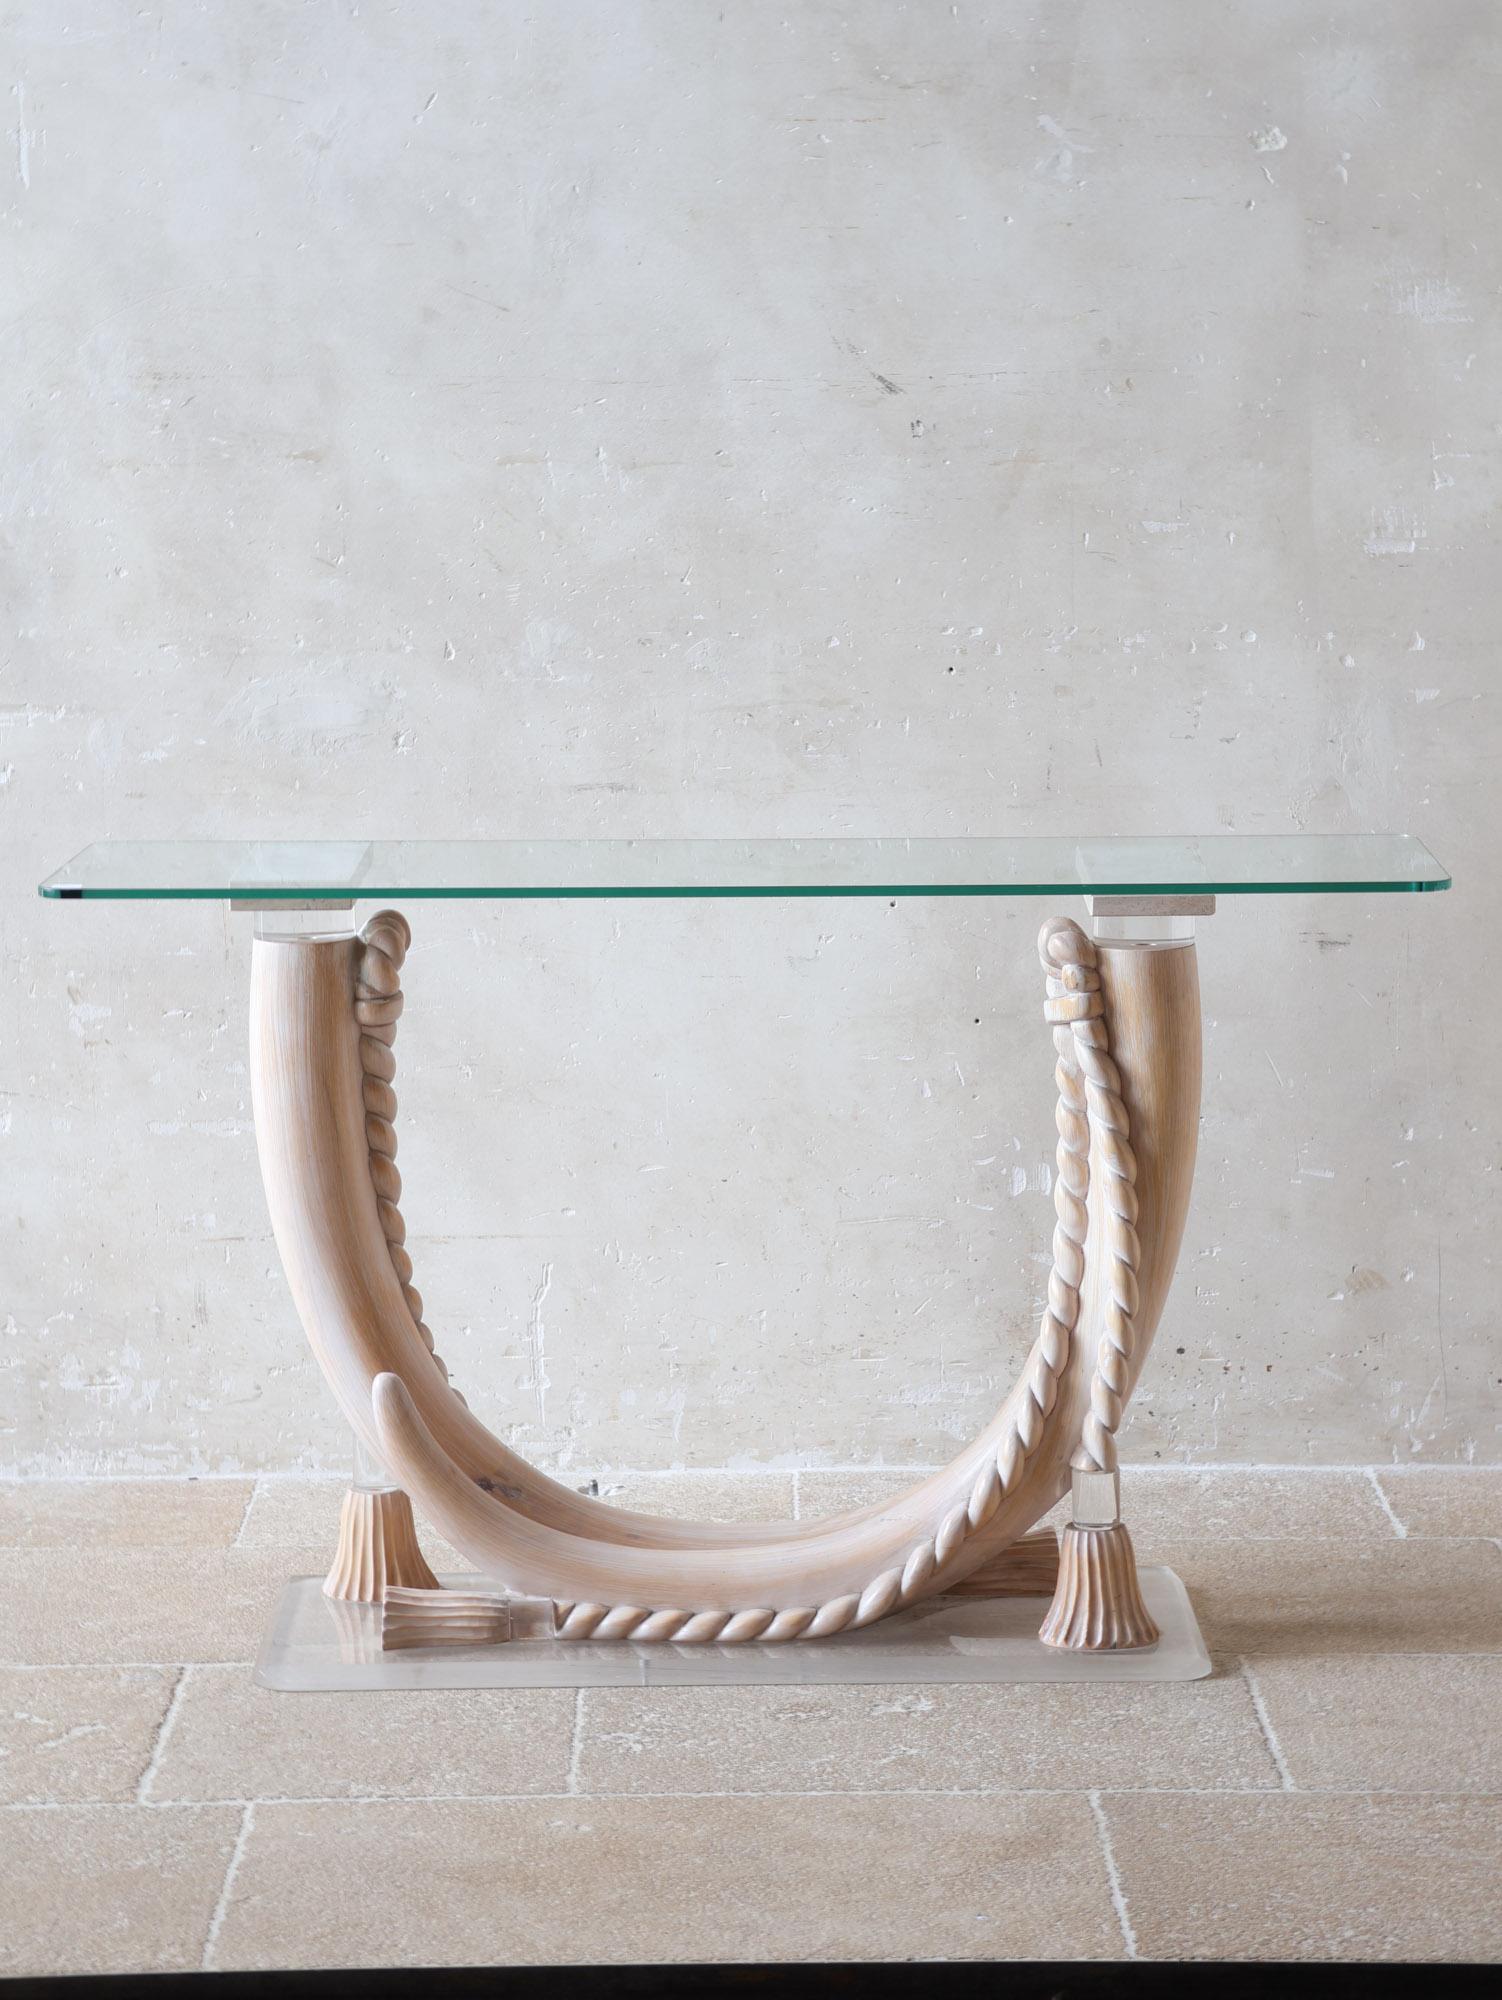 Console table attributed to Sergio Longoni, ca. 1980, Italy. This Italian designer table has a glass top (1 cm thick) and a perlucite base in the shape of tusks, wrapped with cord. The base is placed on a lucite foot.

h 73.5 x w 126 x d 34 cm